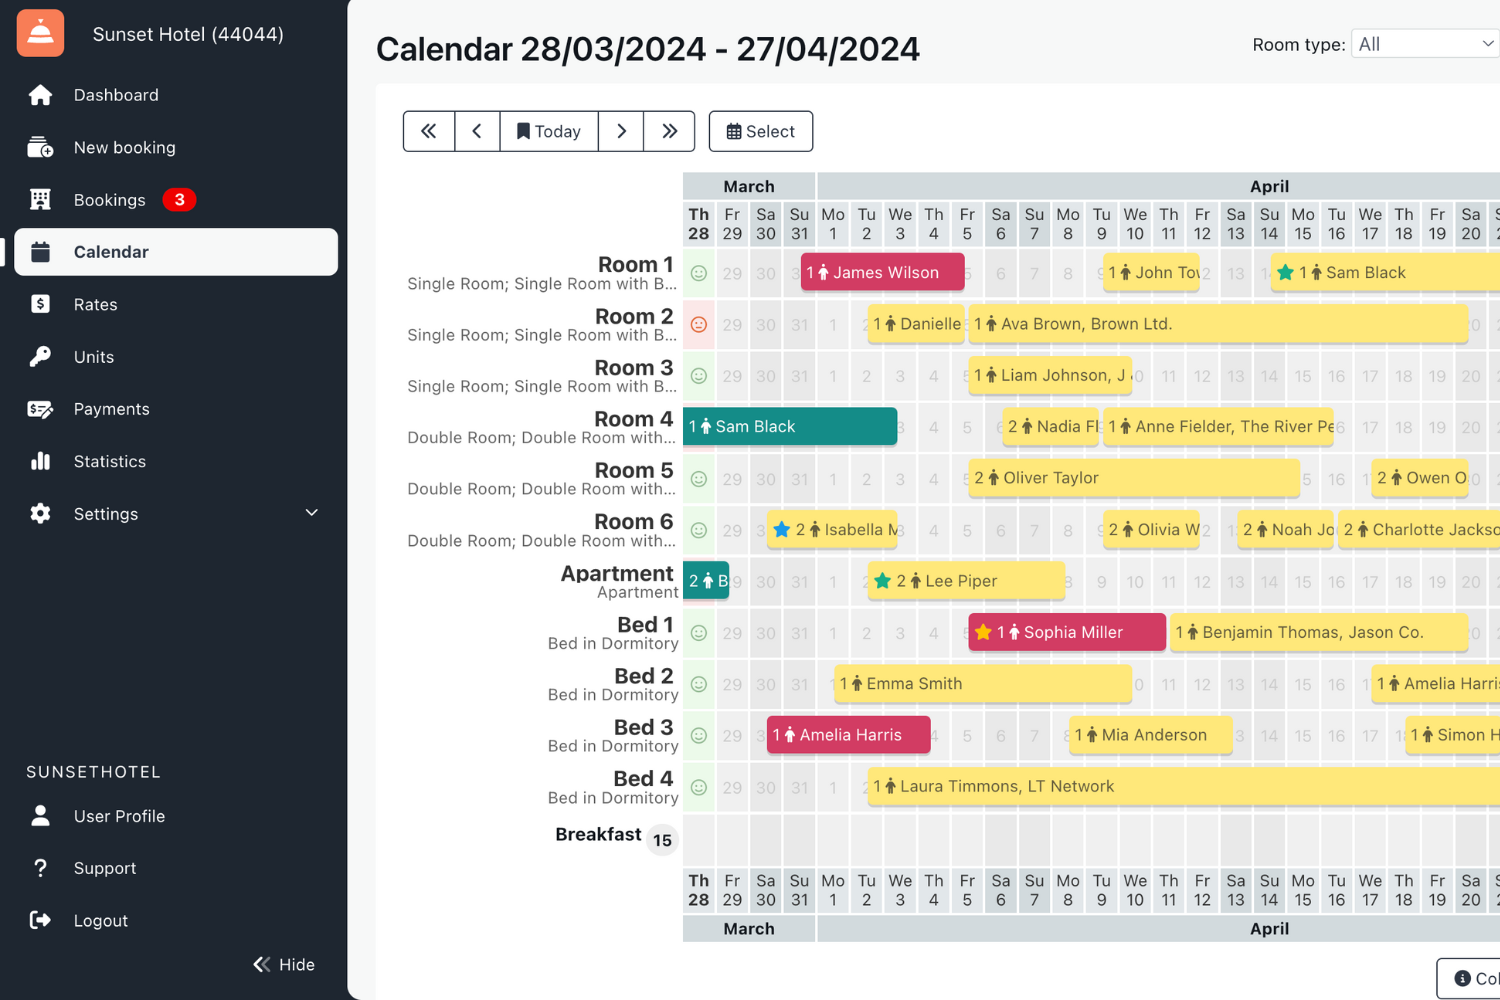 Sirvoy’s calendar page is at the core of your productivity. From it, you can perform many essential actions and see a big-picture overview of bookings, units, availability, selected extras, and housekeeping status. 